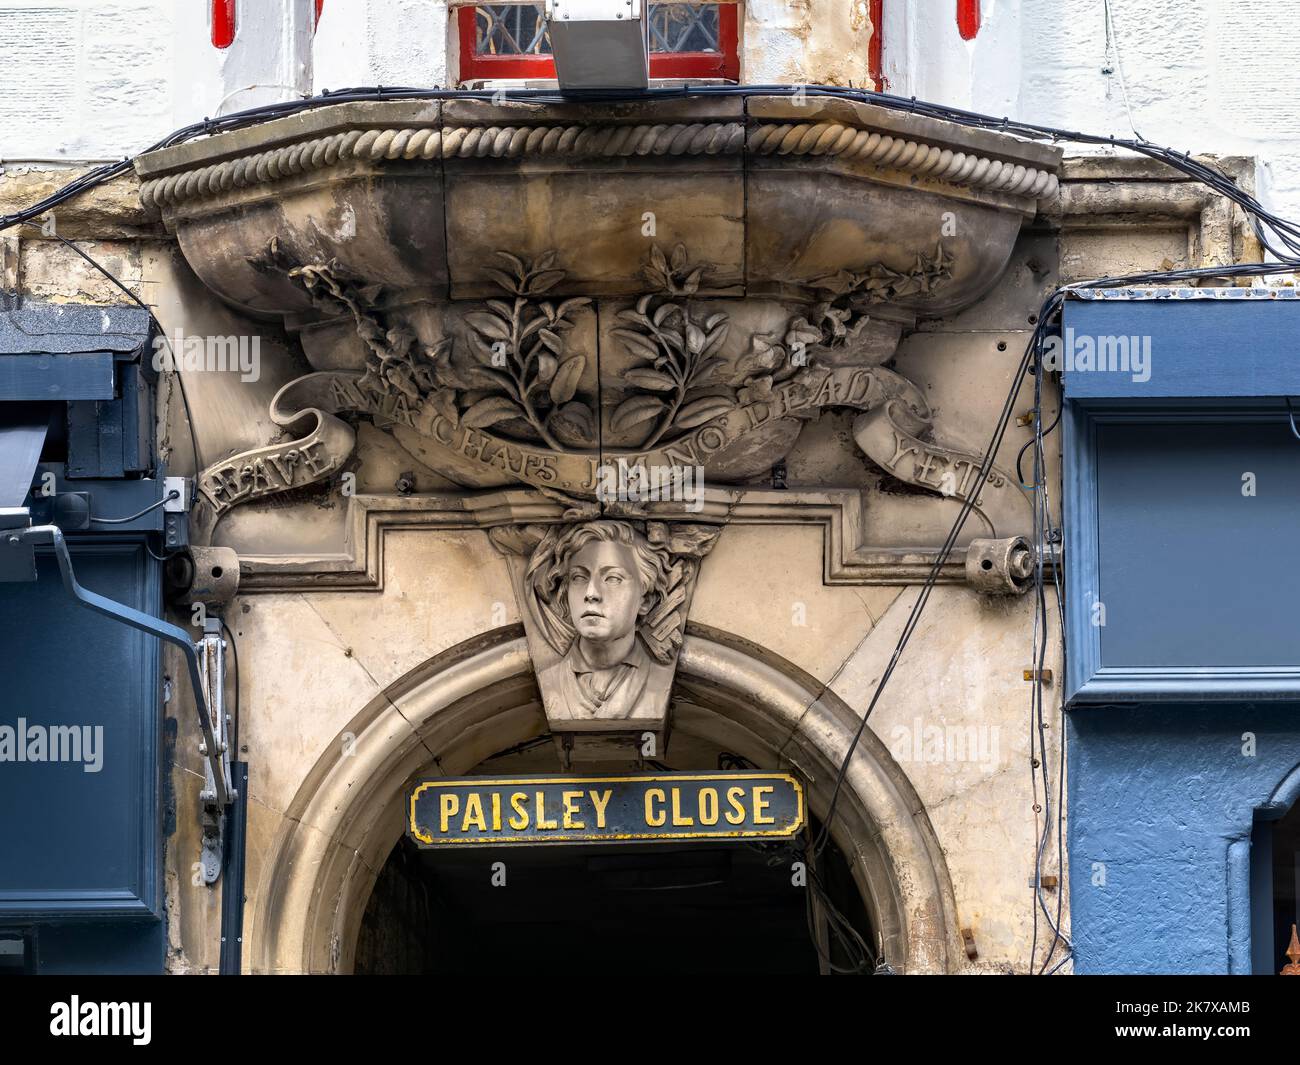 Heave awa' chaps, I'm no' dead yet! - The entrance to Paisley Close and the bust of a boy saved from the rubble when the building above collapsed. Stock Photo